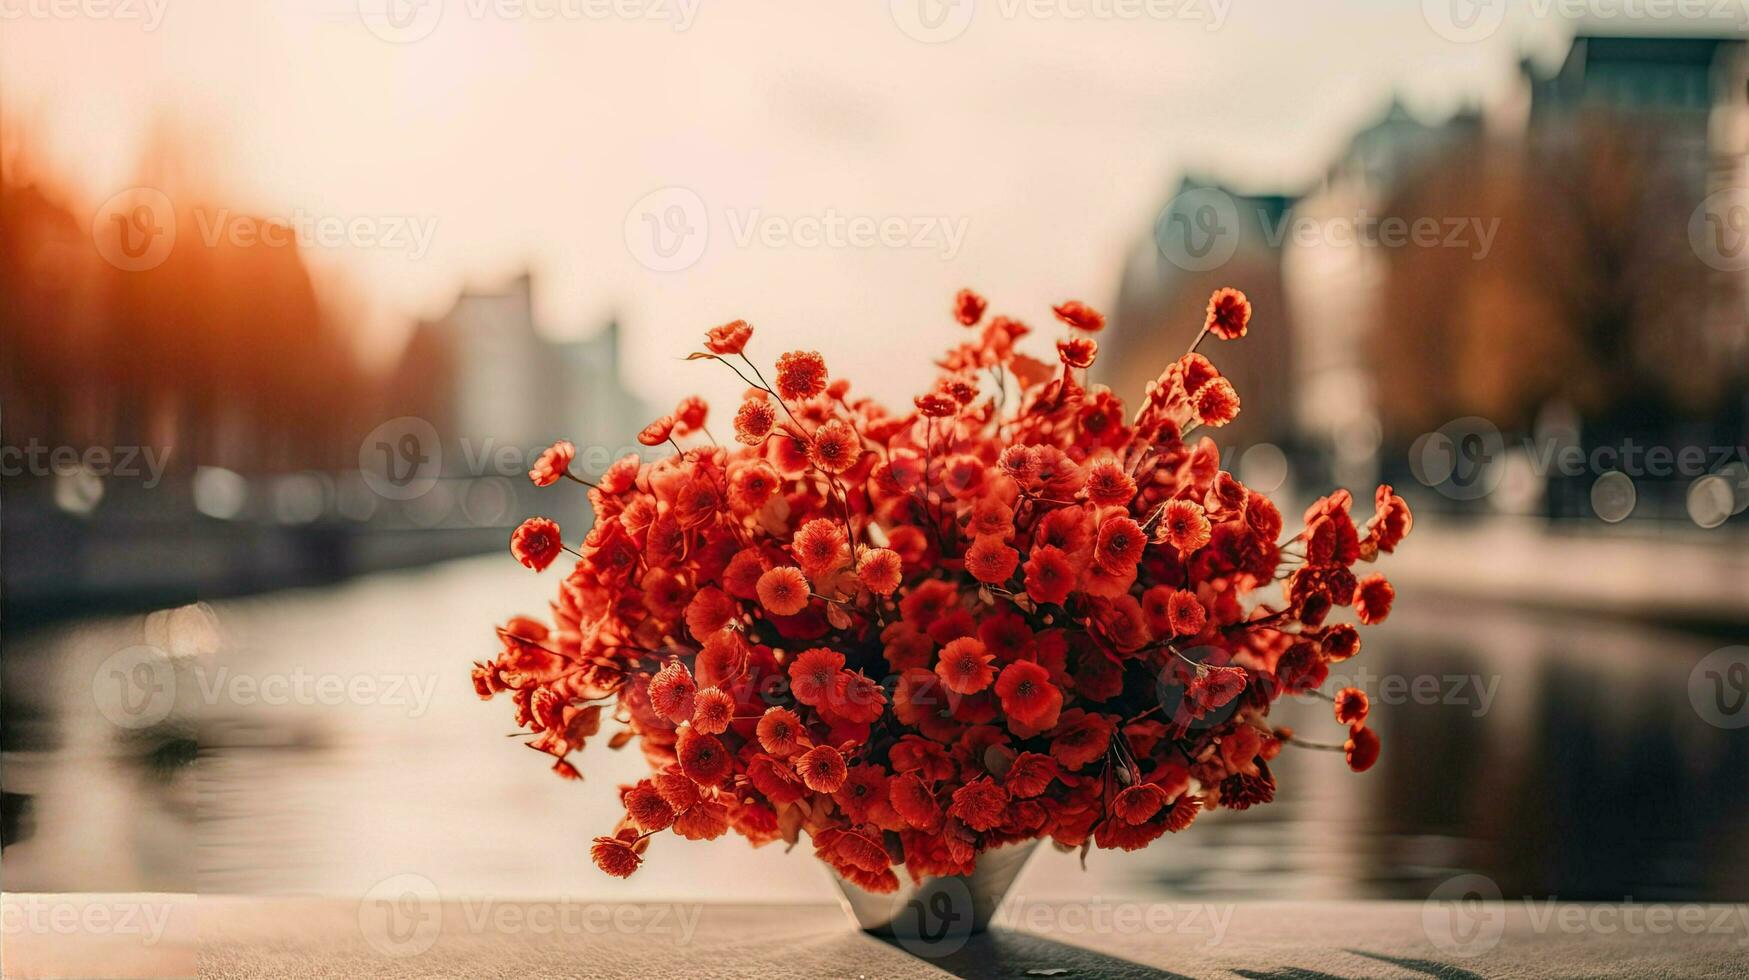 Flowers in a vase, beautiful scenery photo